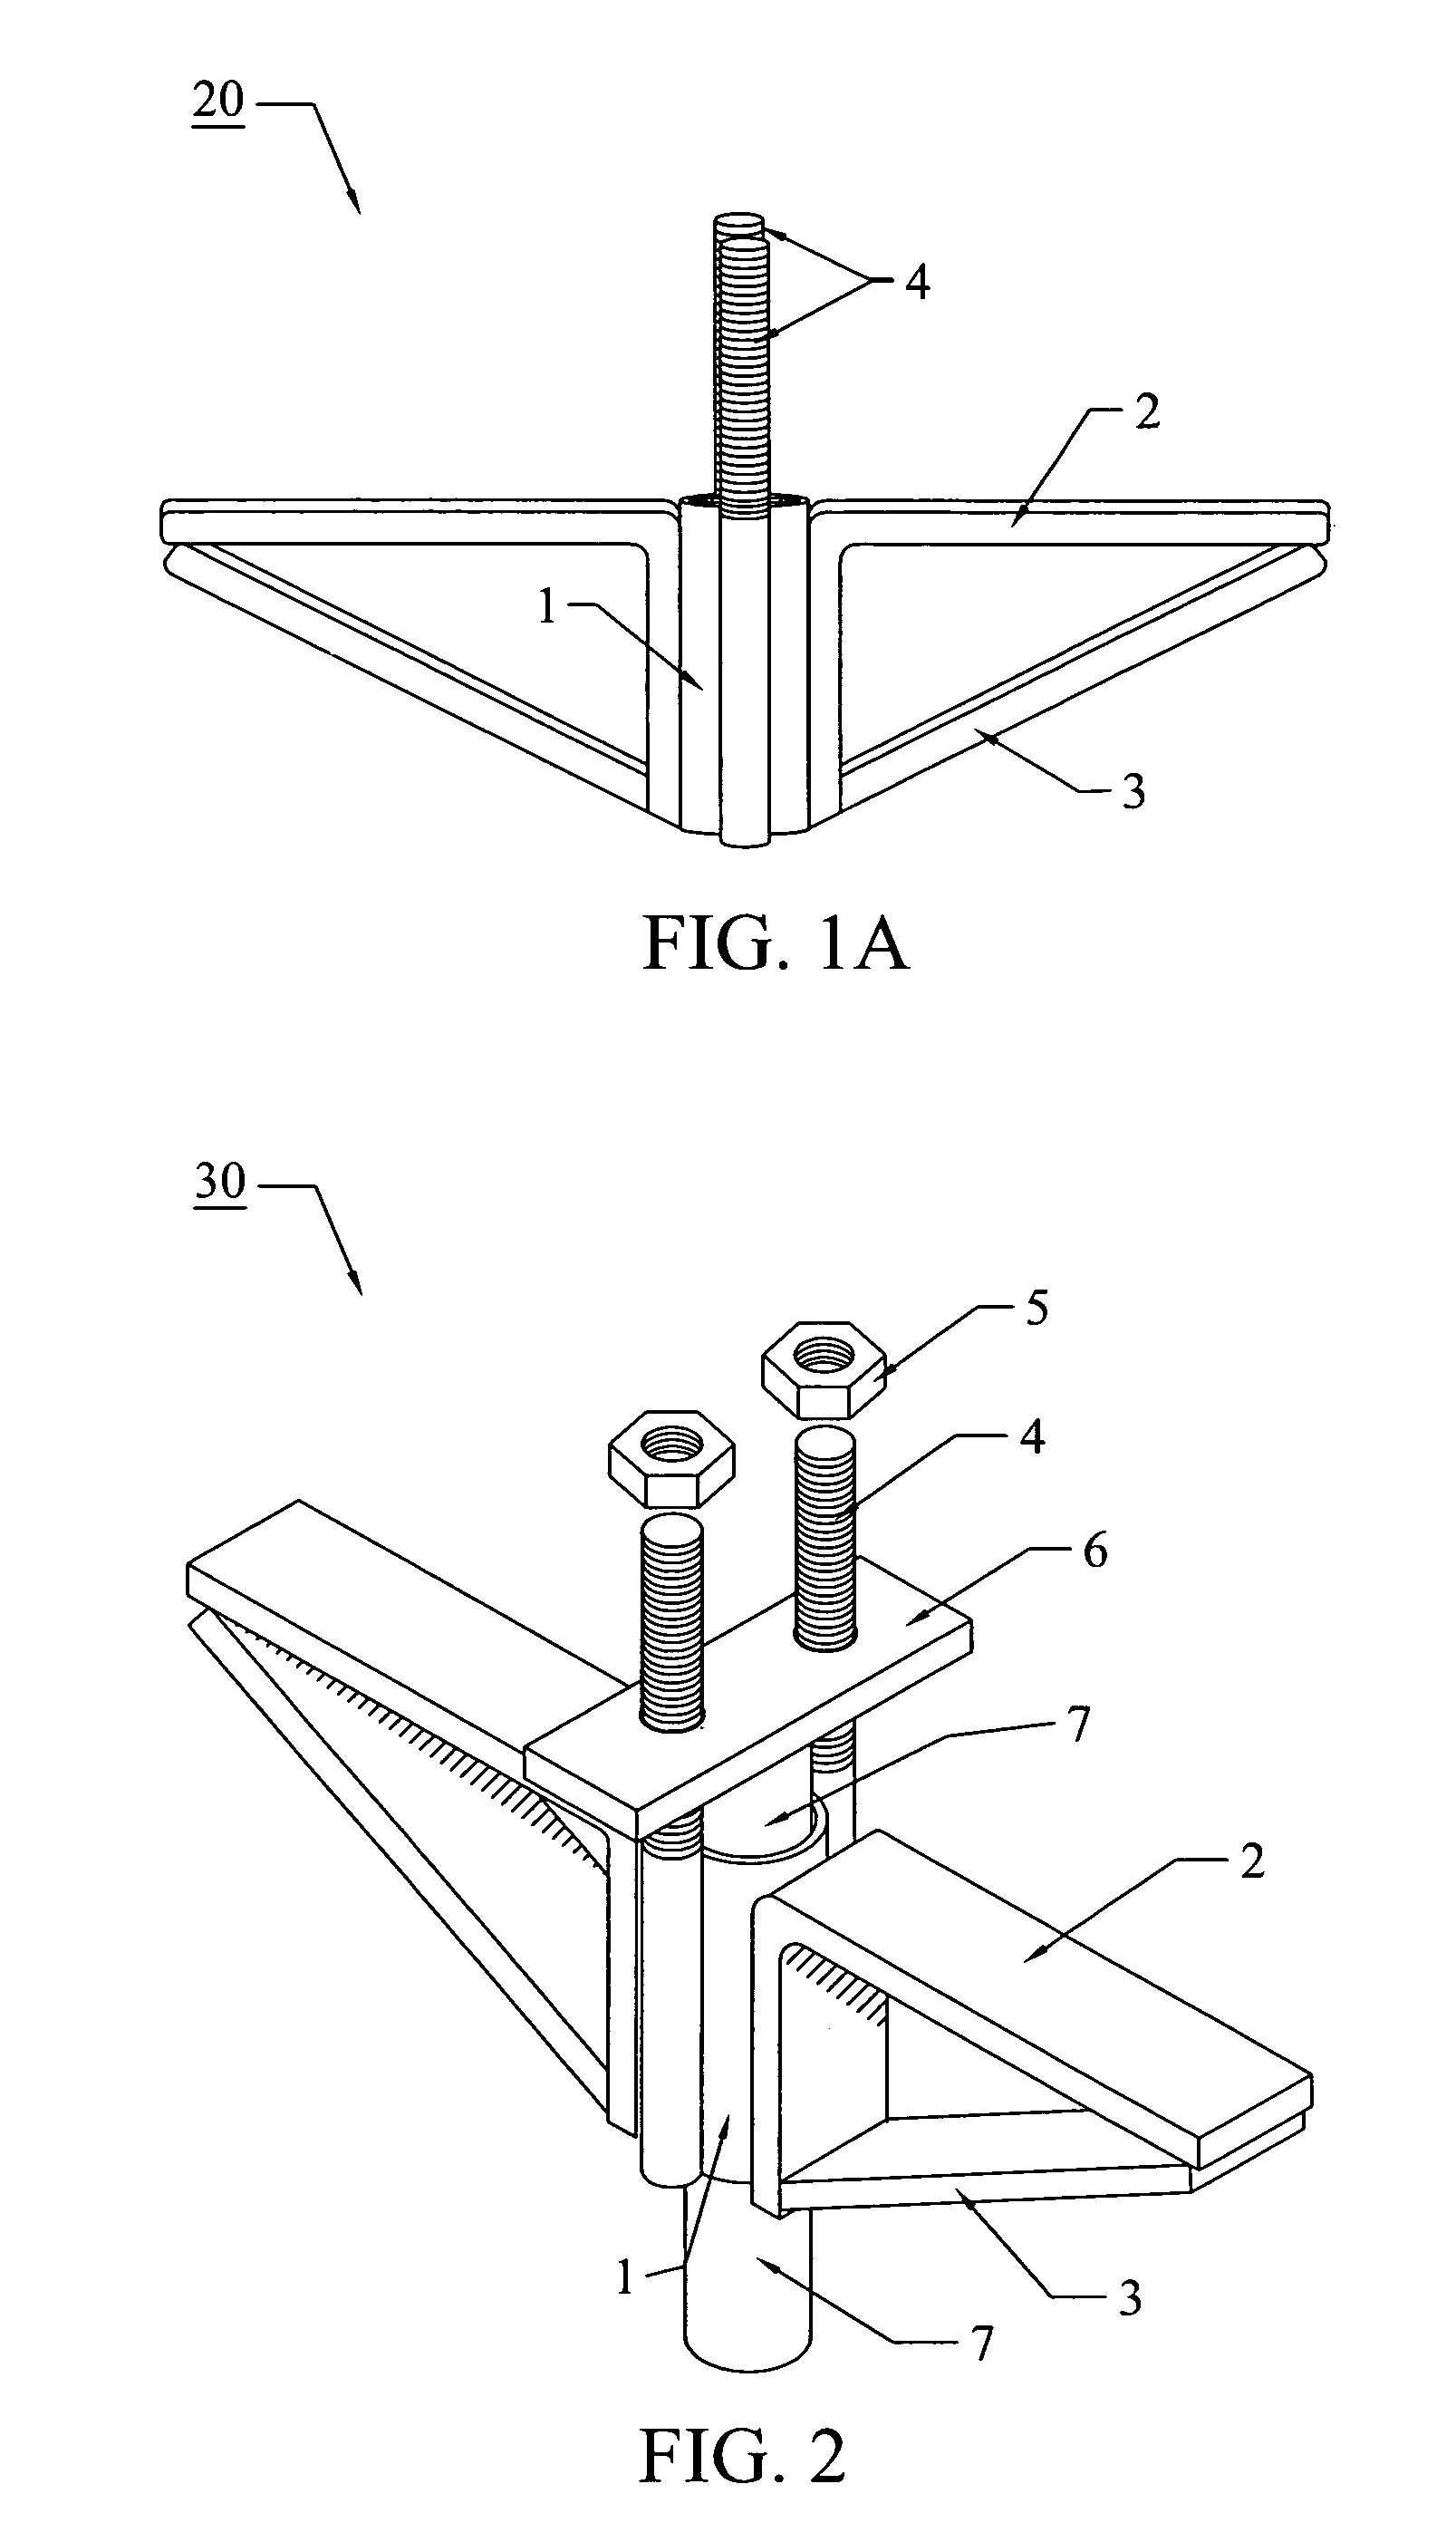 Method and apparatus for lifting and stabilizing subsided slabs, flatwork and foundations of buildings